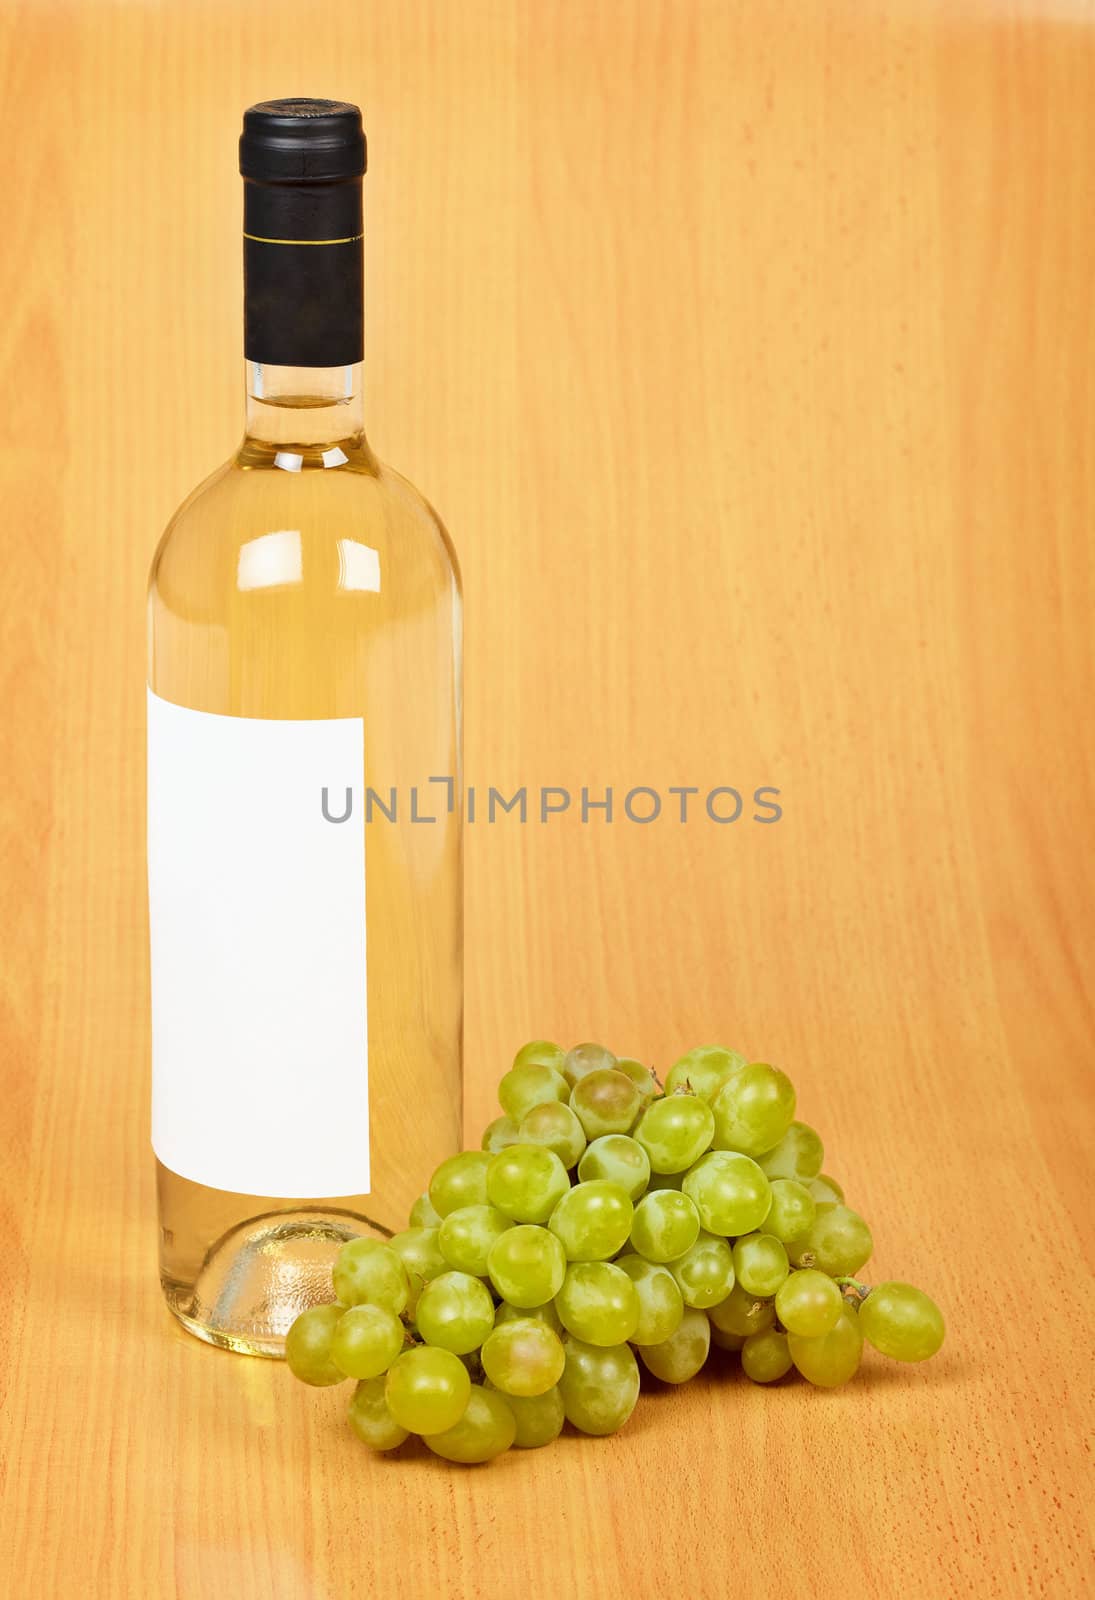 A bottle of white wine and bunch of grapes